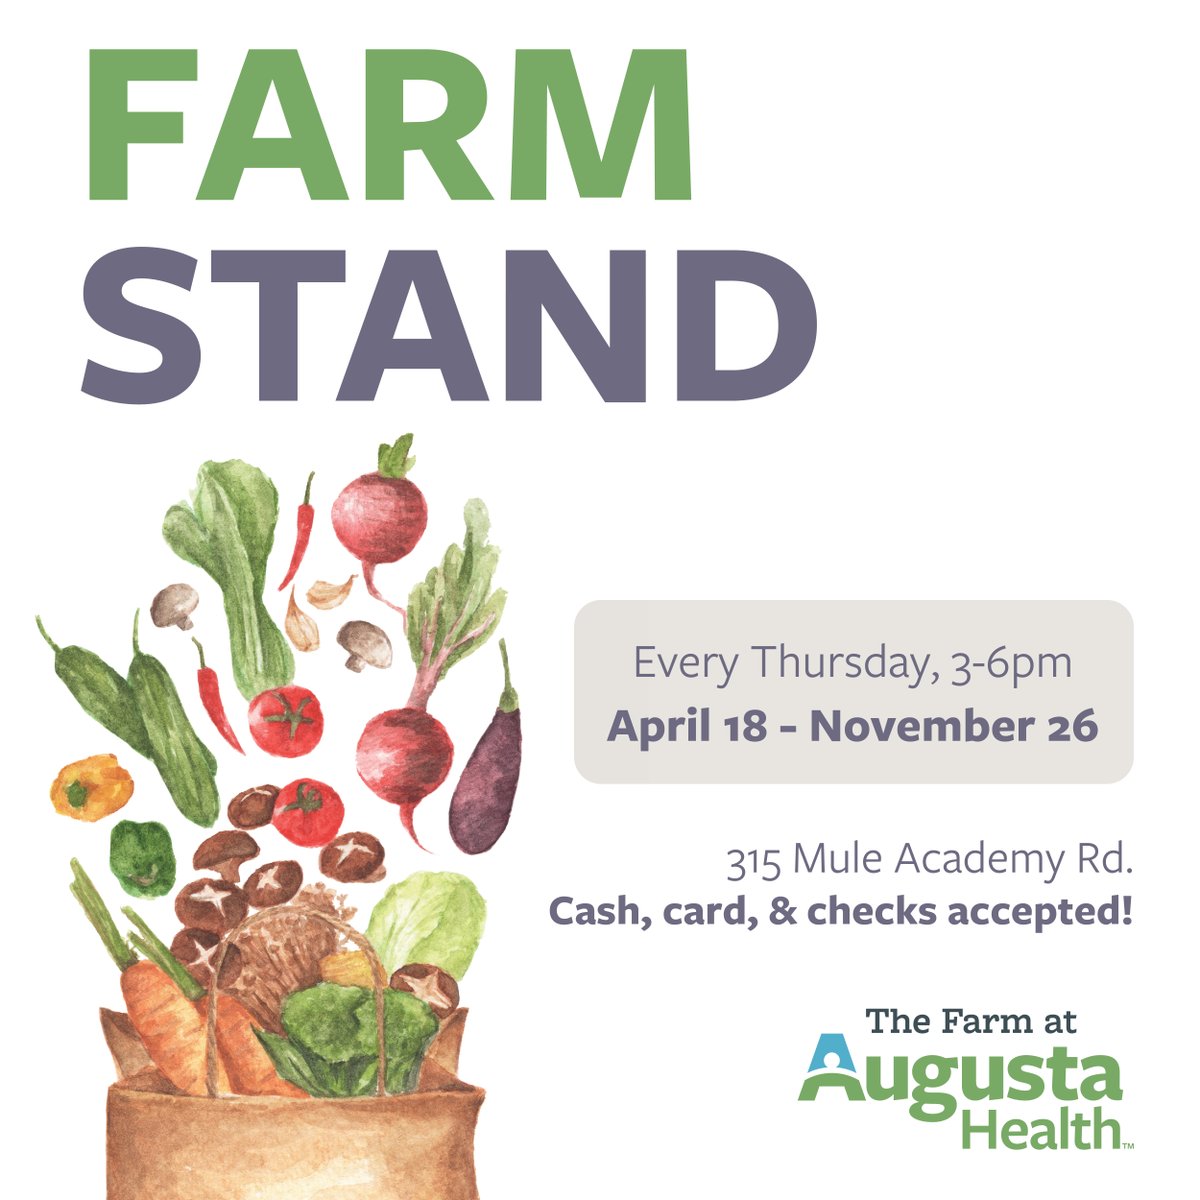 The Farm at Augusta Health Farm Stand is returning soon! We will have the farm stand every Thursday, starting April 18th. We will be open from 3-6pm, and accept cash, card, and checks. Swing by and pick up some #local #produce!